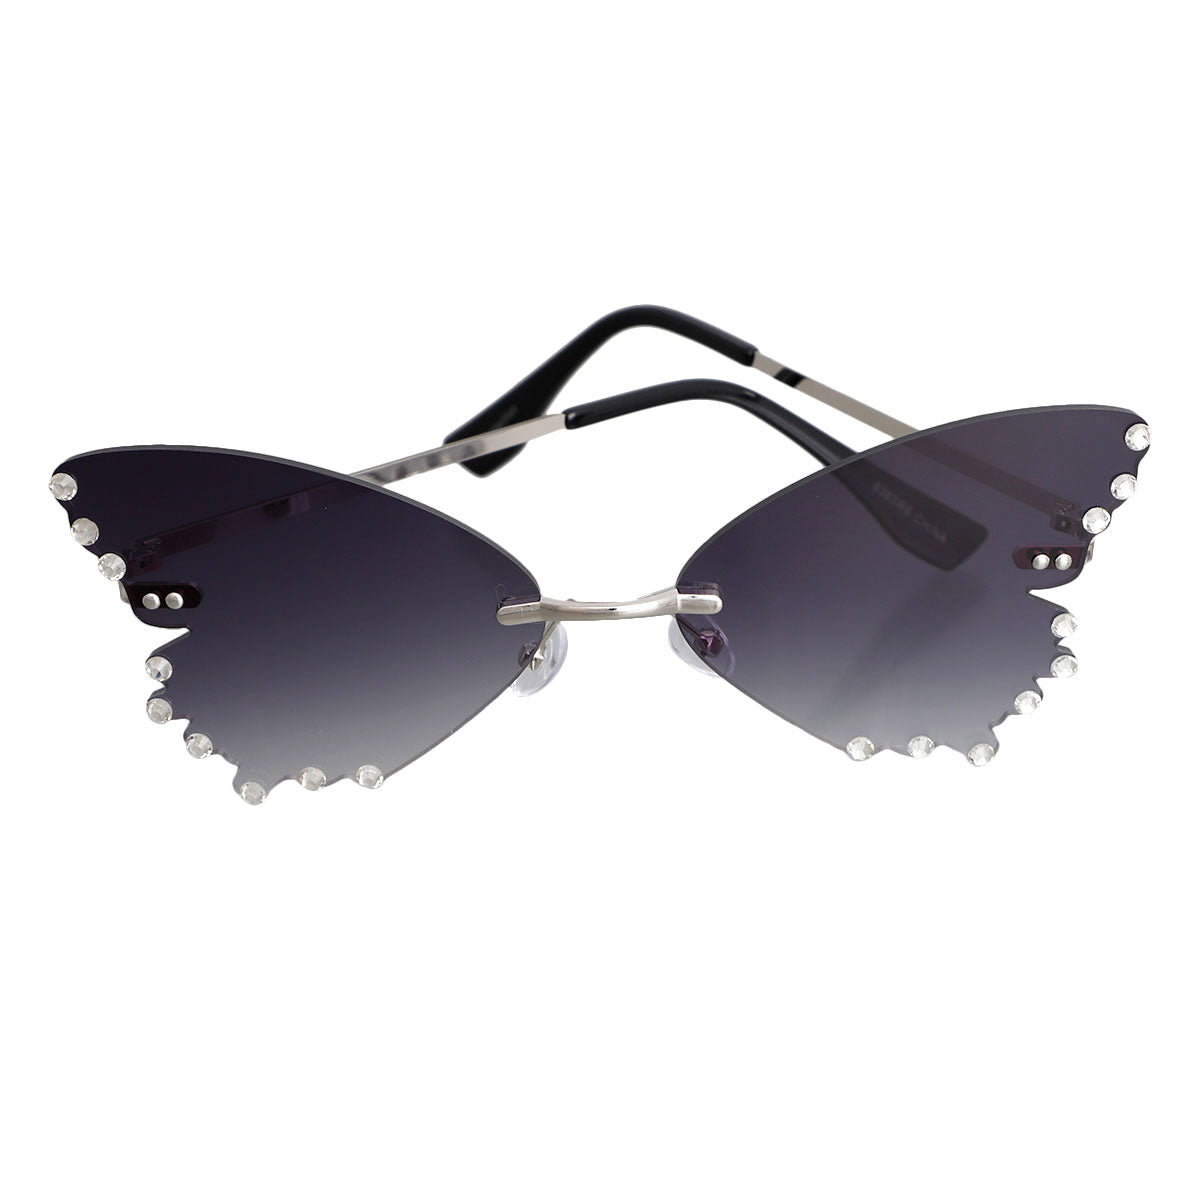 Black Butterfly Shaped Lens Sunglasses